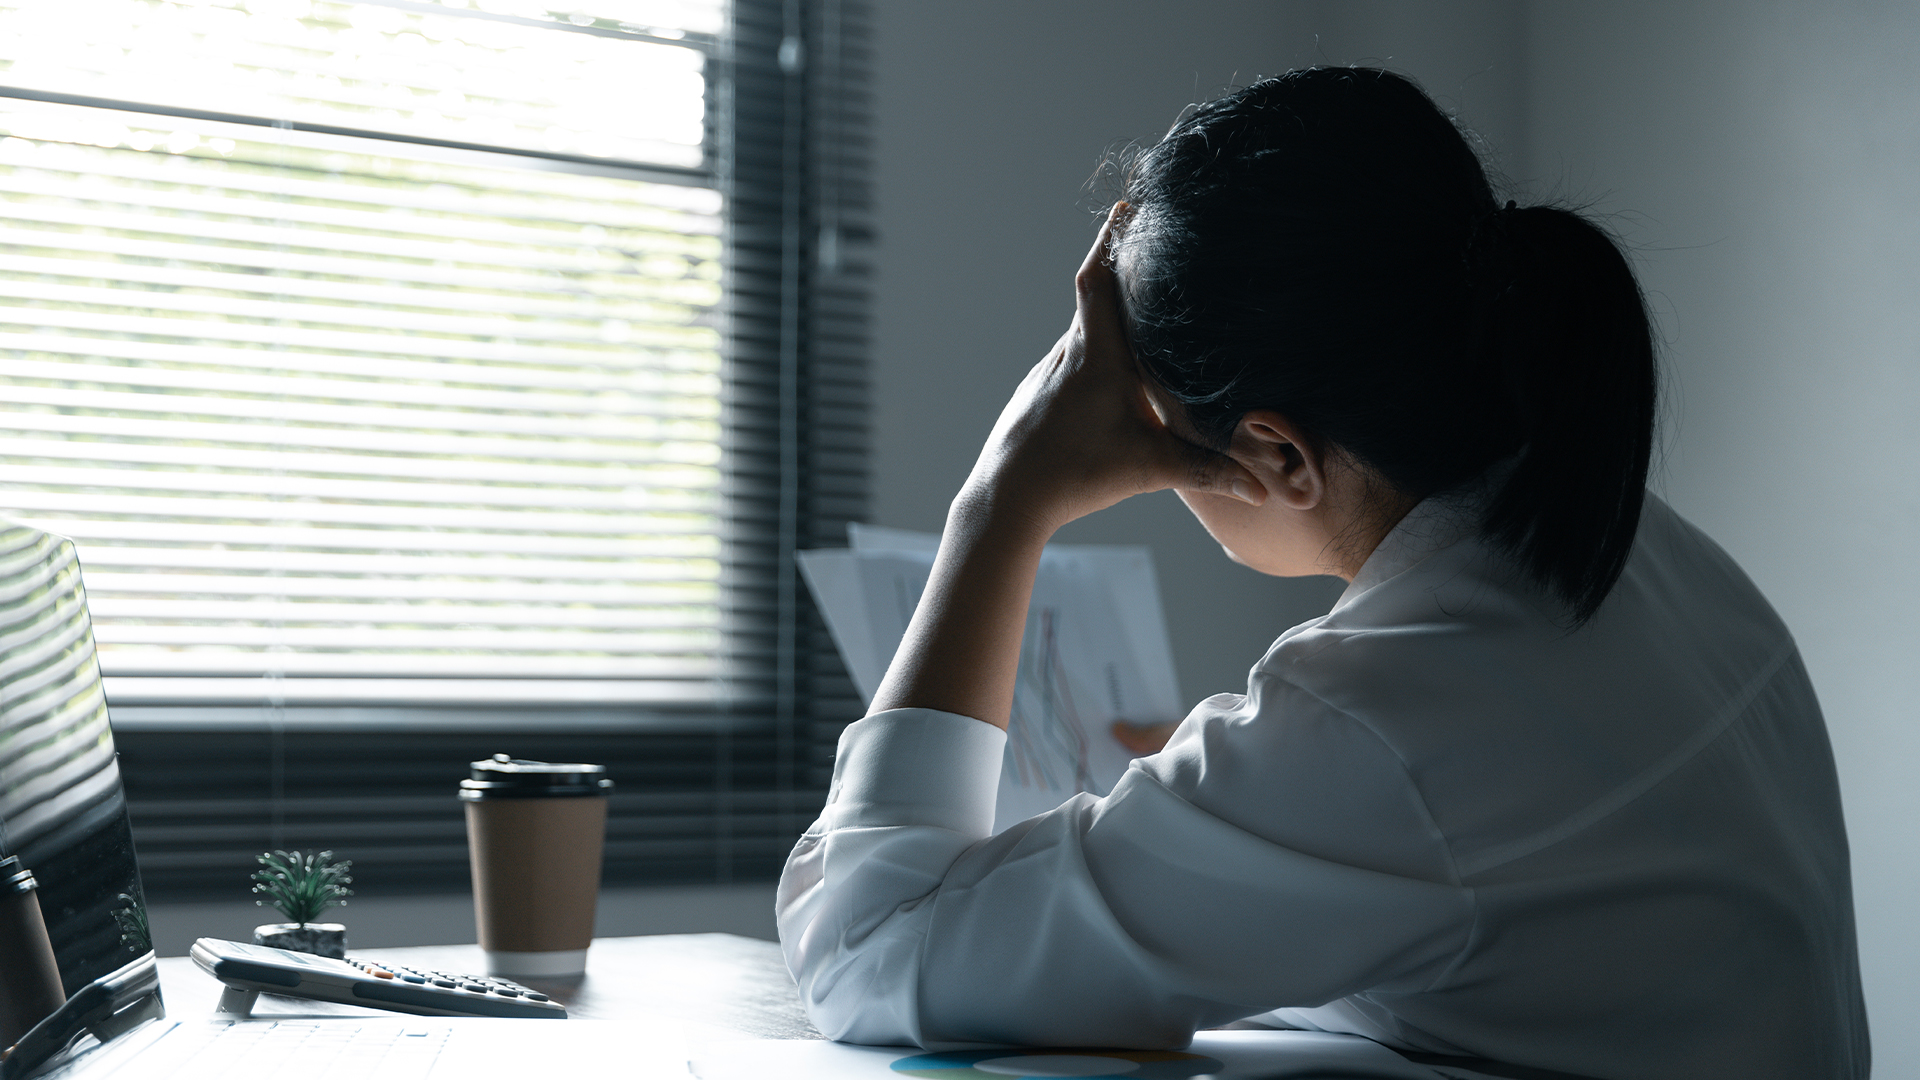 Blue Monday: 18 Million Days Lost at Work to Mental Health